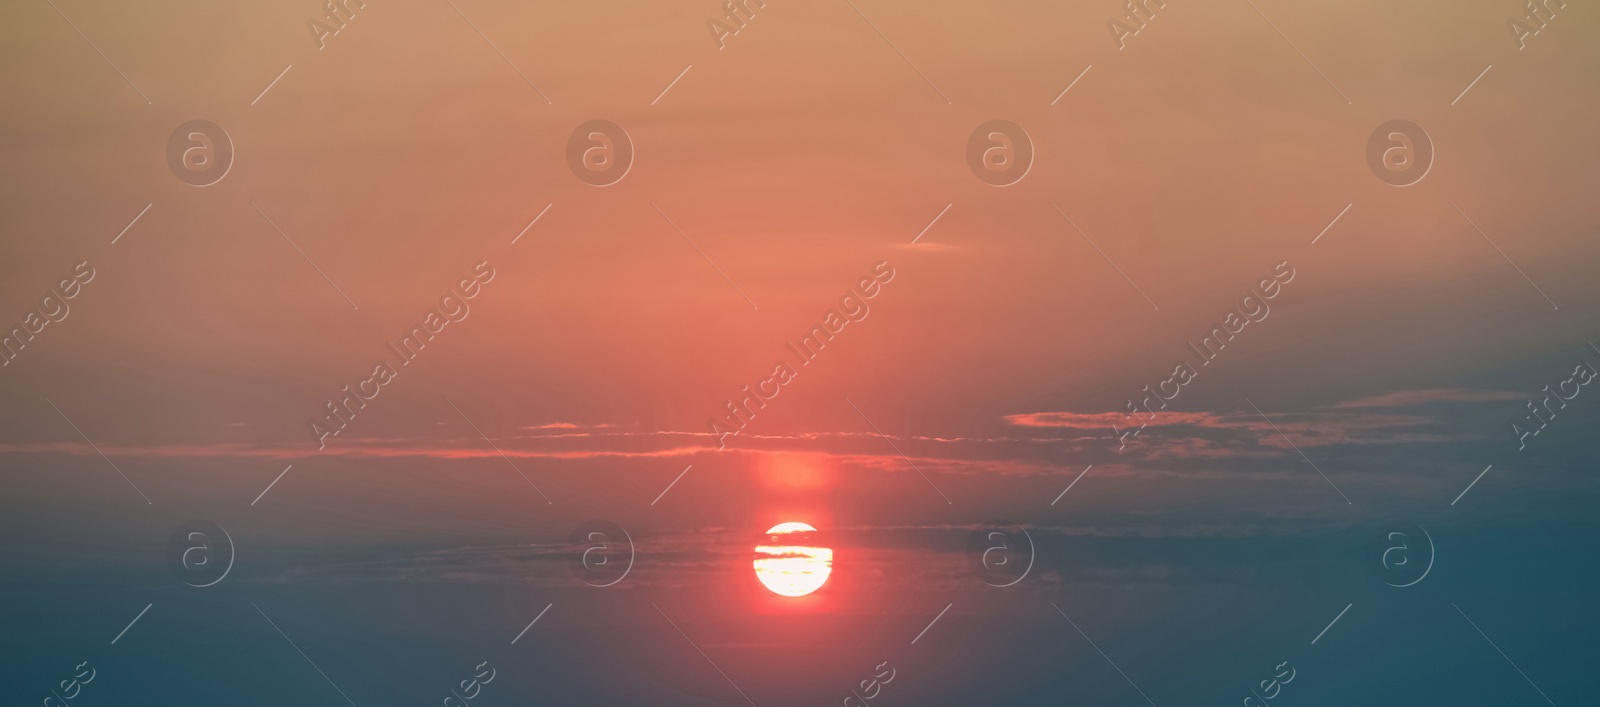 Image of Picturesque sky with sun at sunset. Banner design